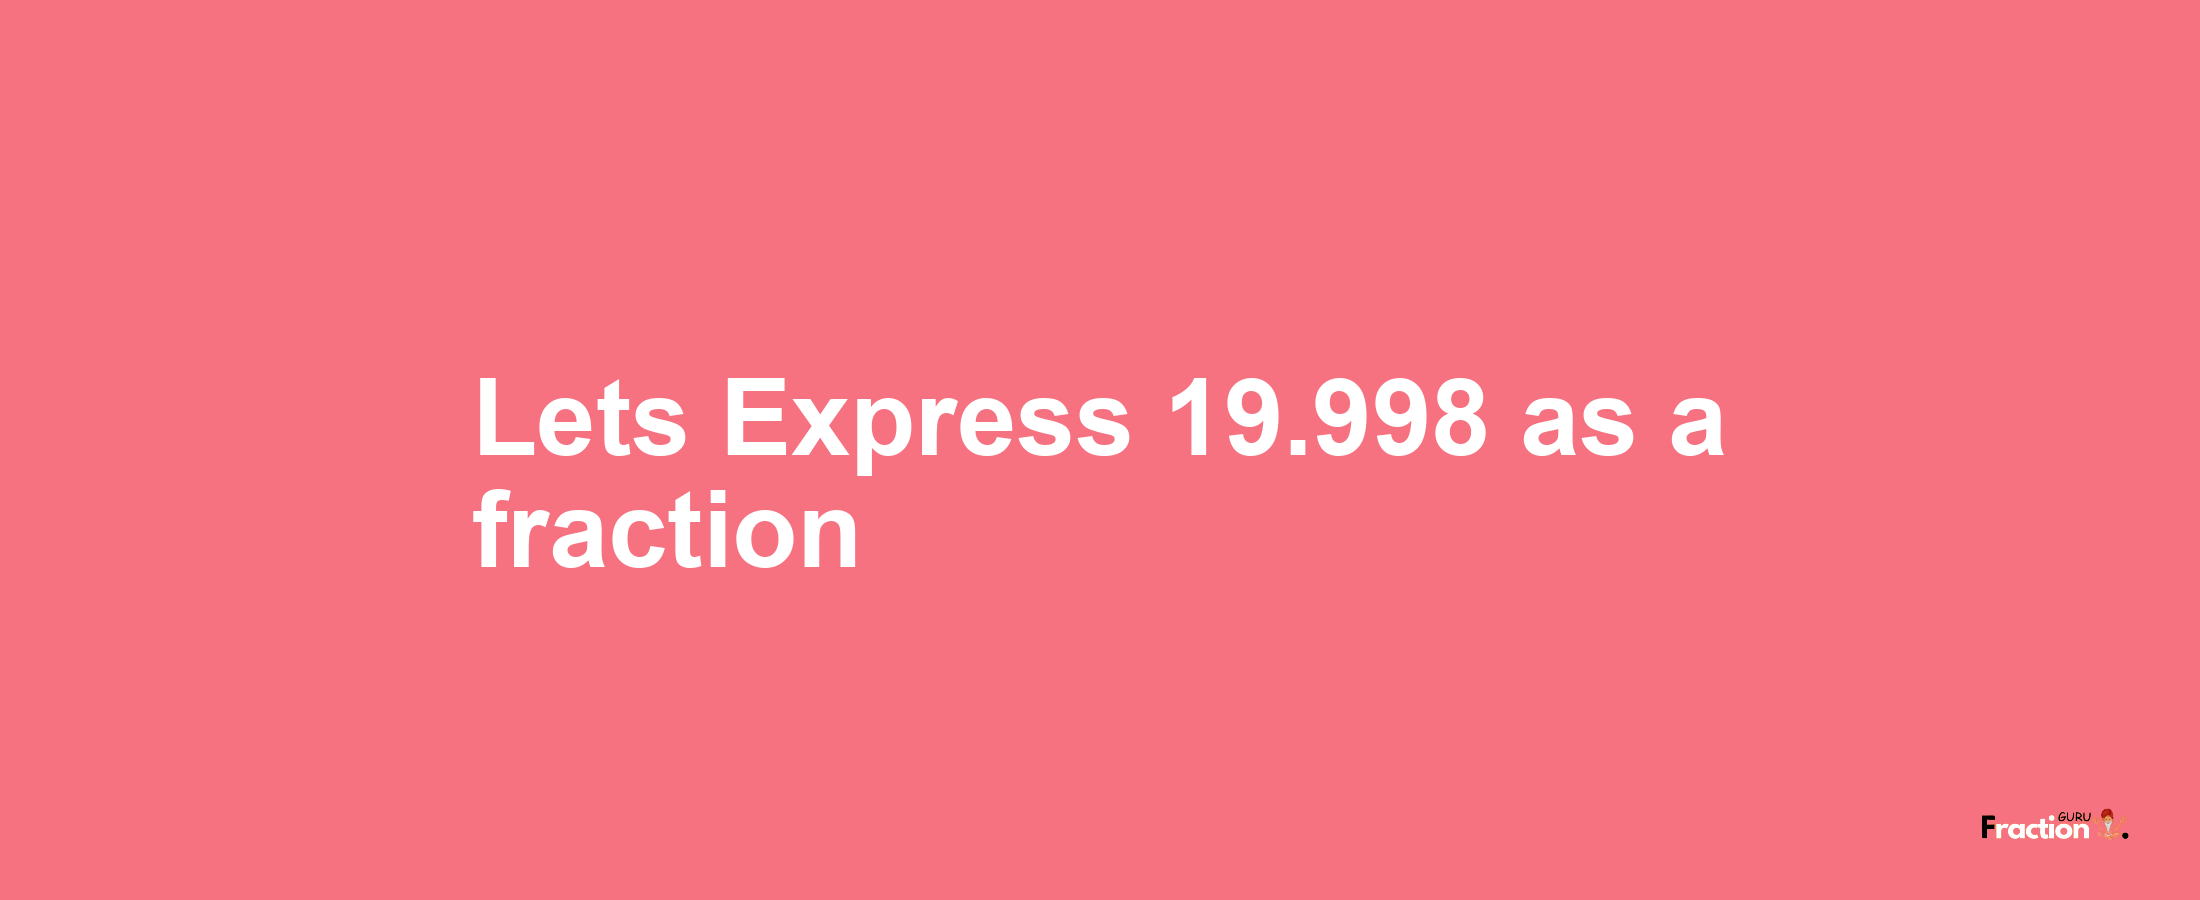 Lets Express 19.998 as afraction